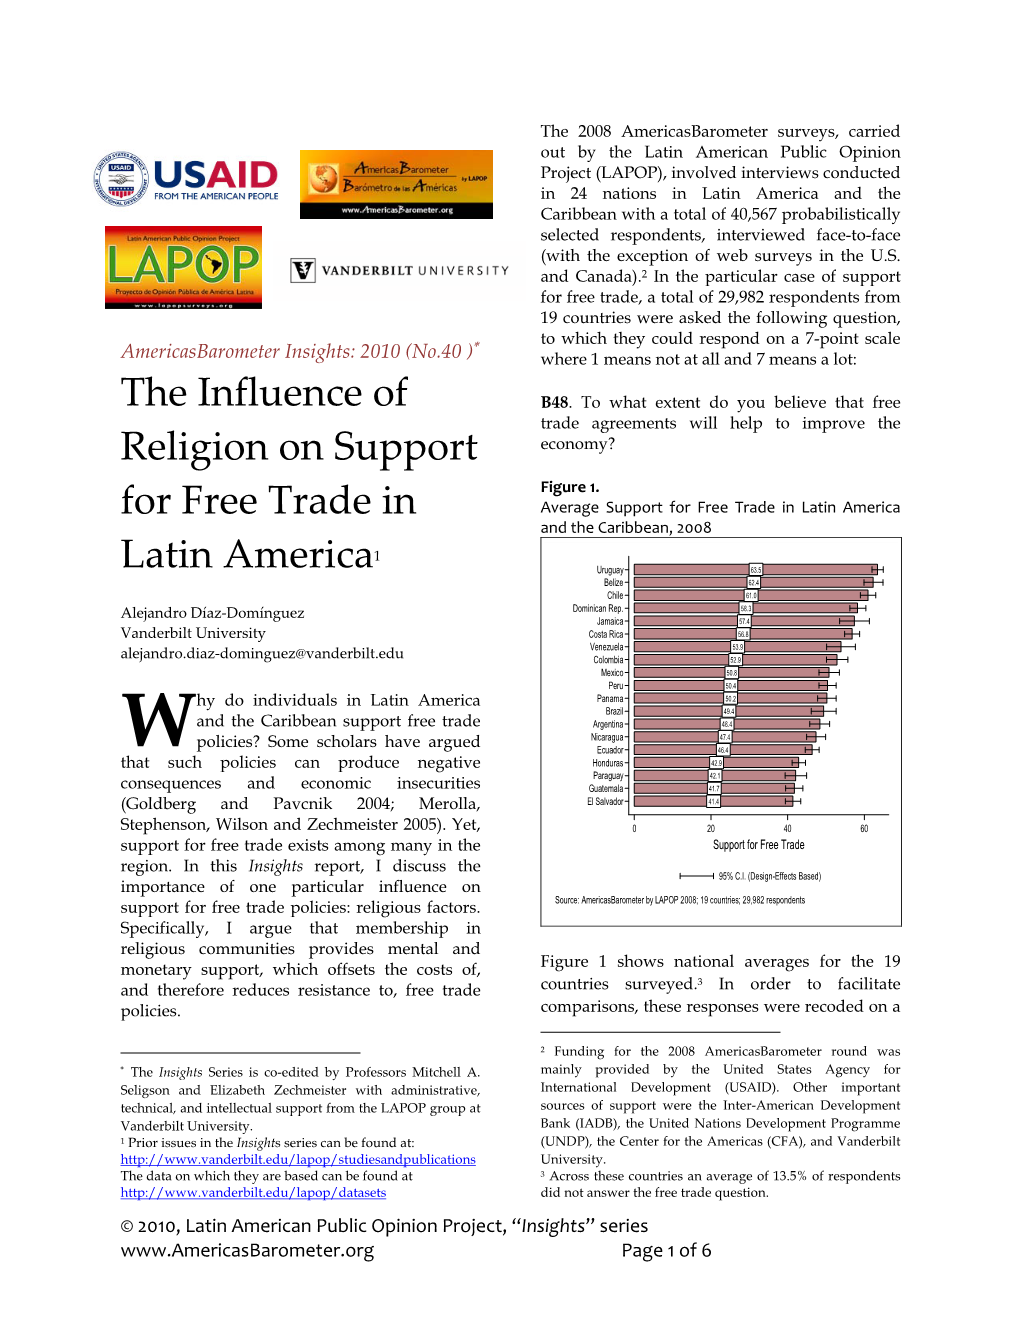 The Influence of Religion on Support for Free Trade in Latin America1